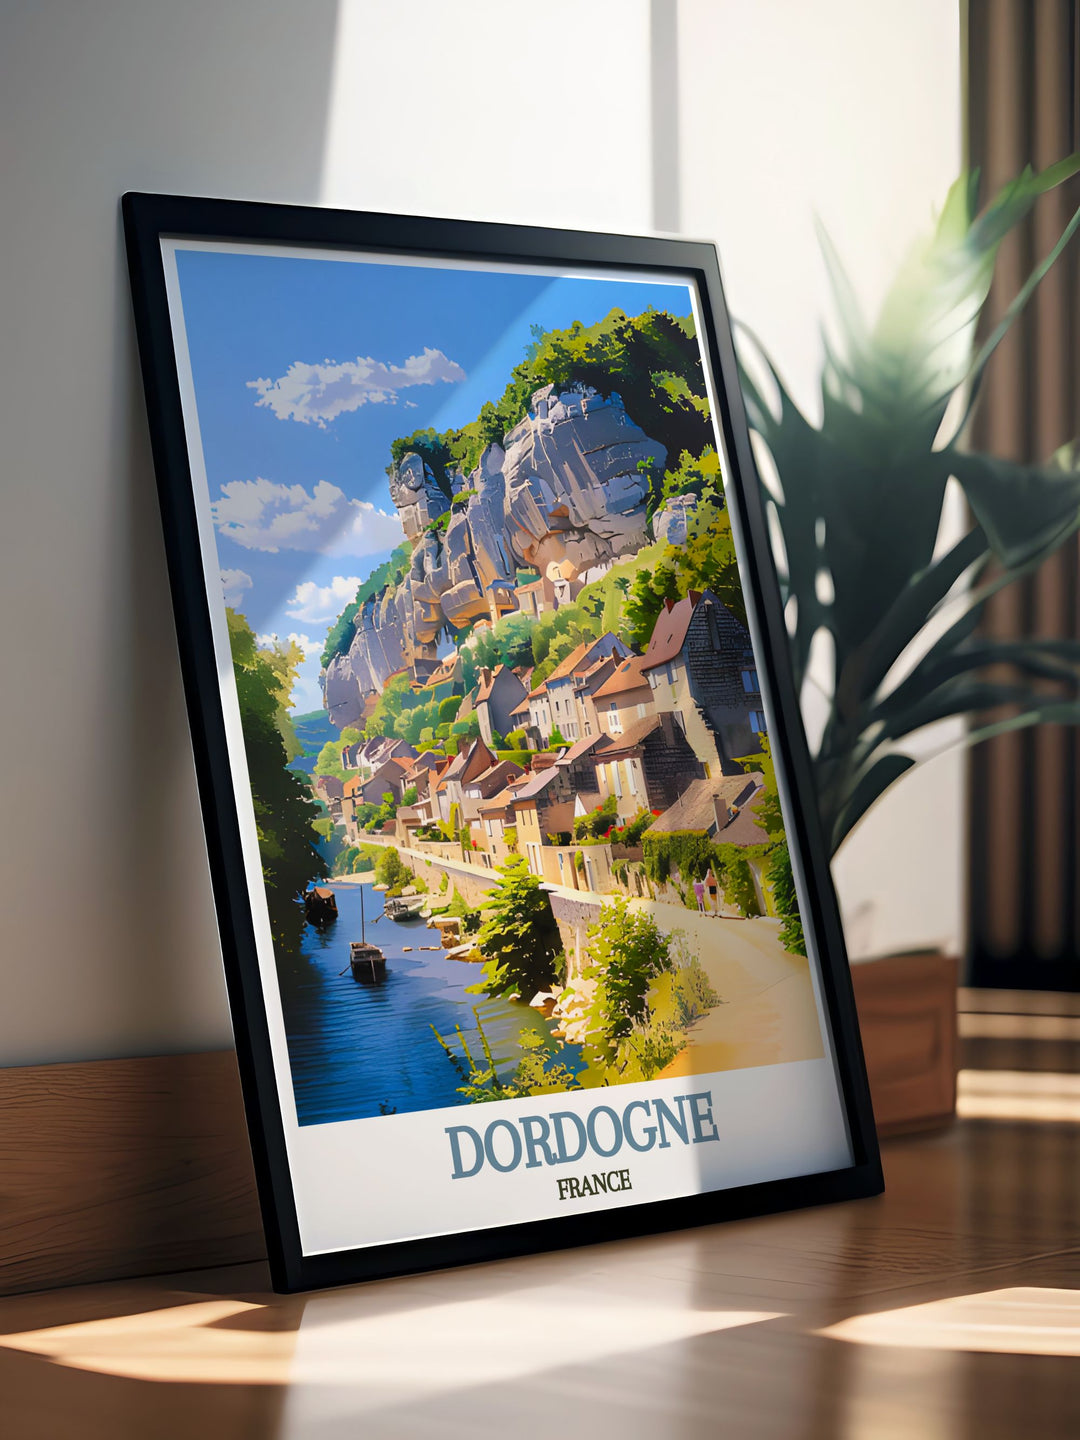 Featuring La Roque Gageac, this art print captures the villages historic charm and breathtaking scenery, perfect for adding a touch of French beauty to your home.